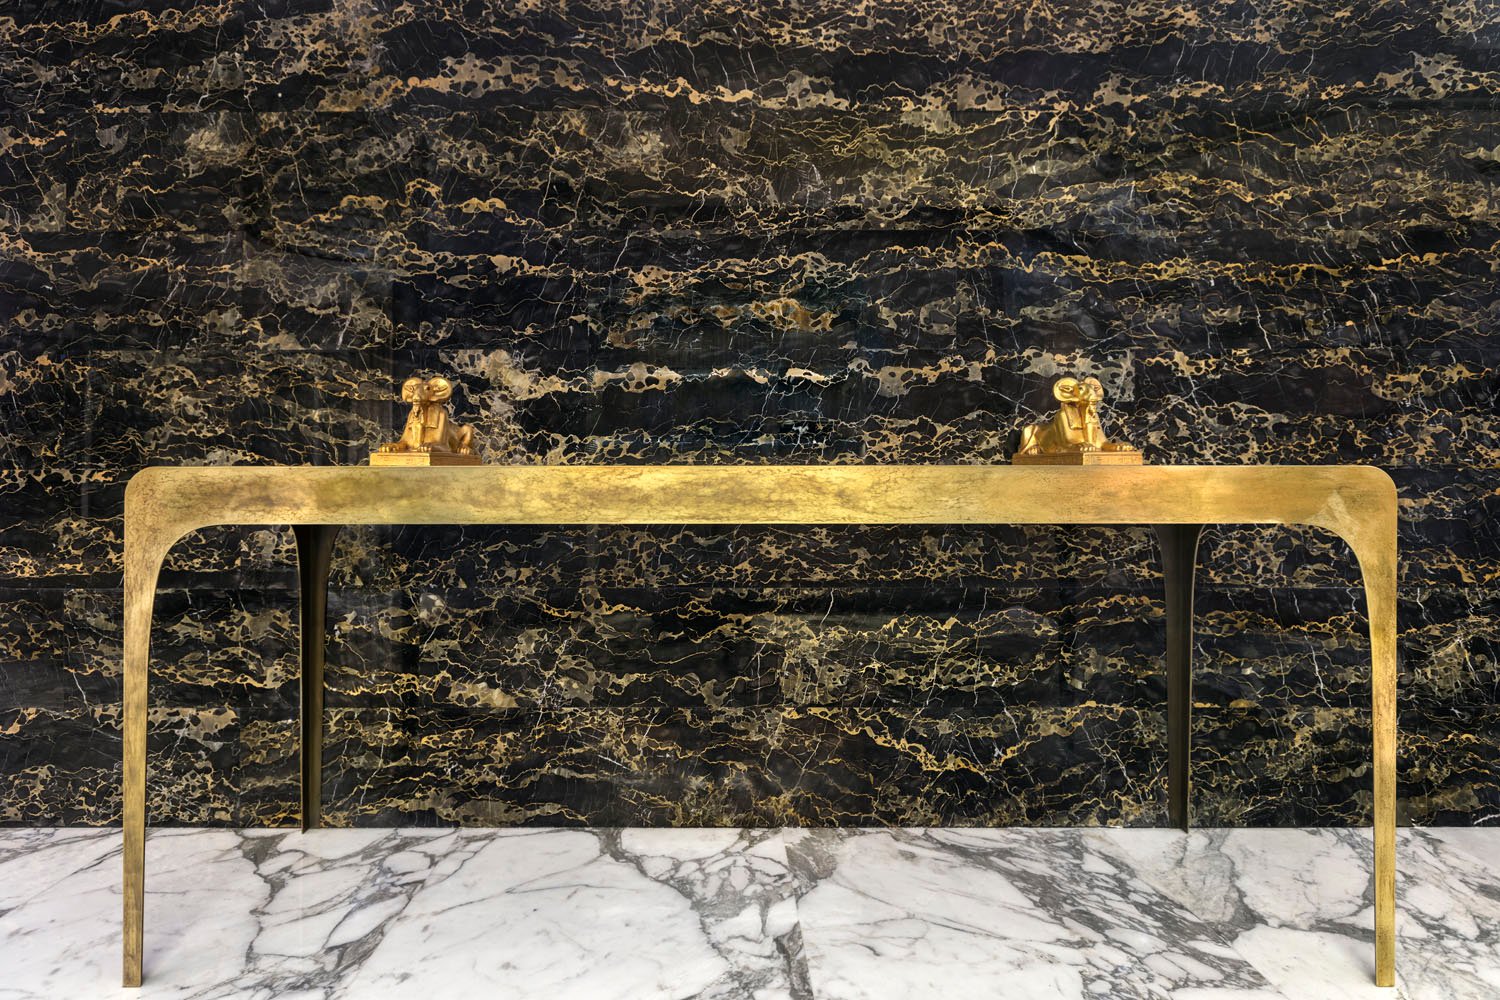 The entrance console is designed by the architect specifically for this project is handcrafted in brass and communicates with the suspended elements. A sober and daily luxury, which could also be considere | Mohamed Somji